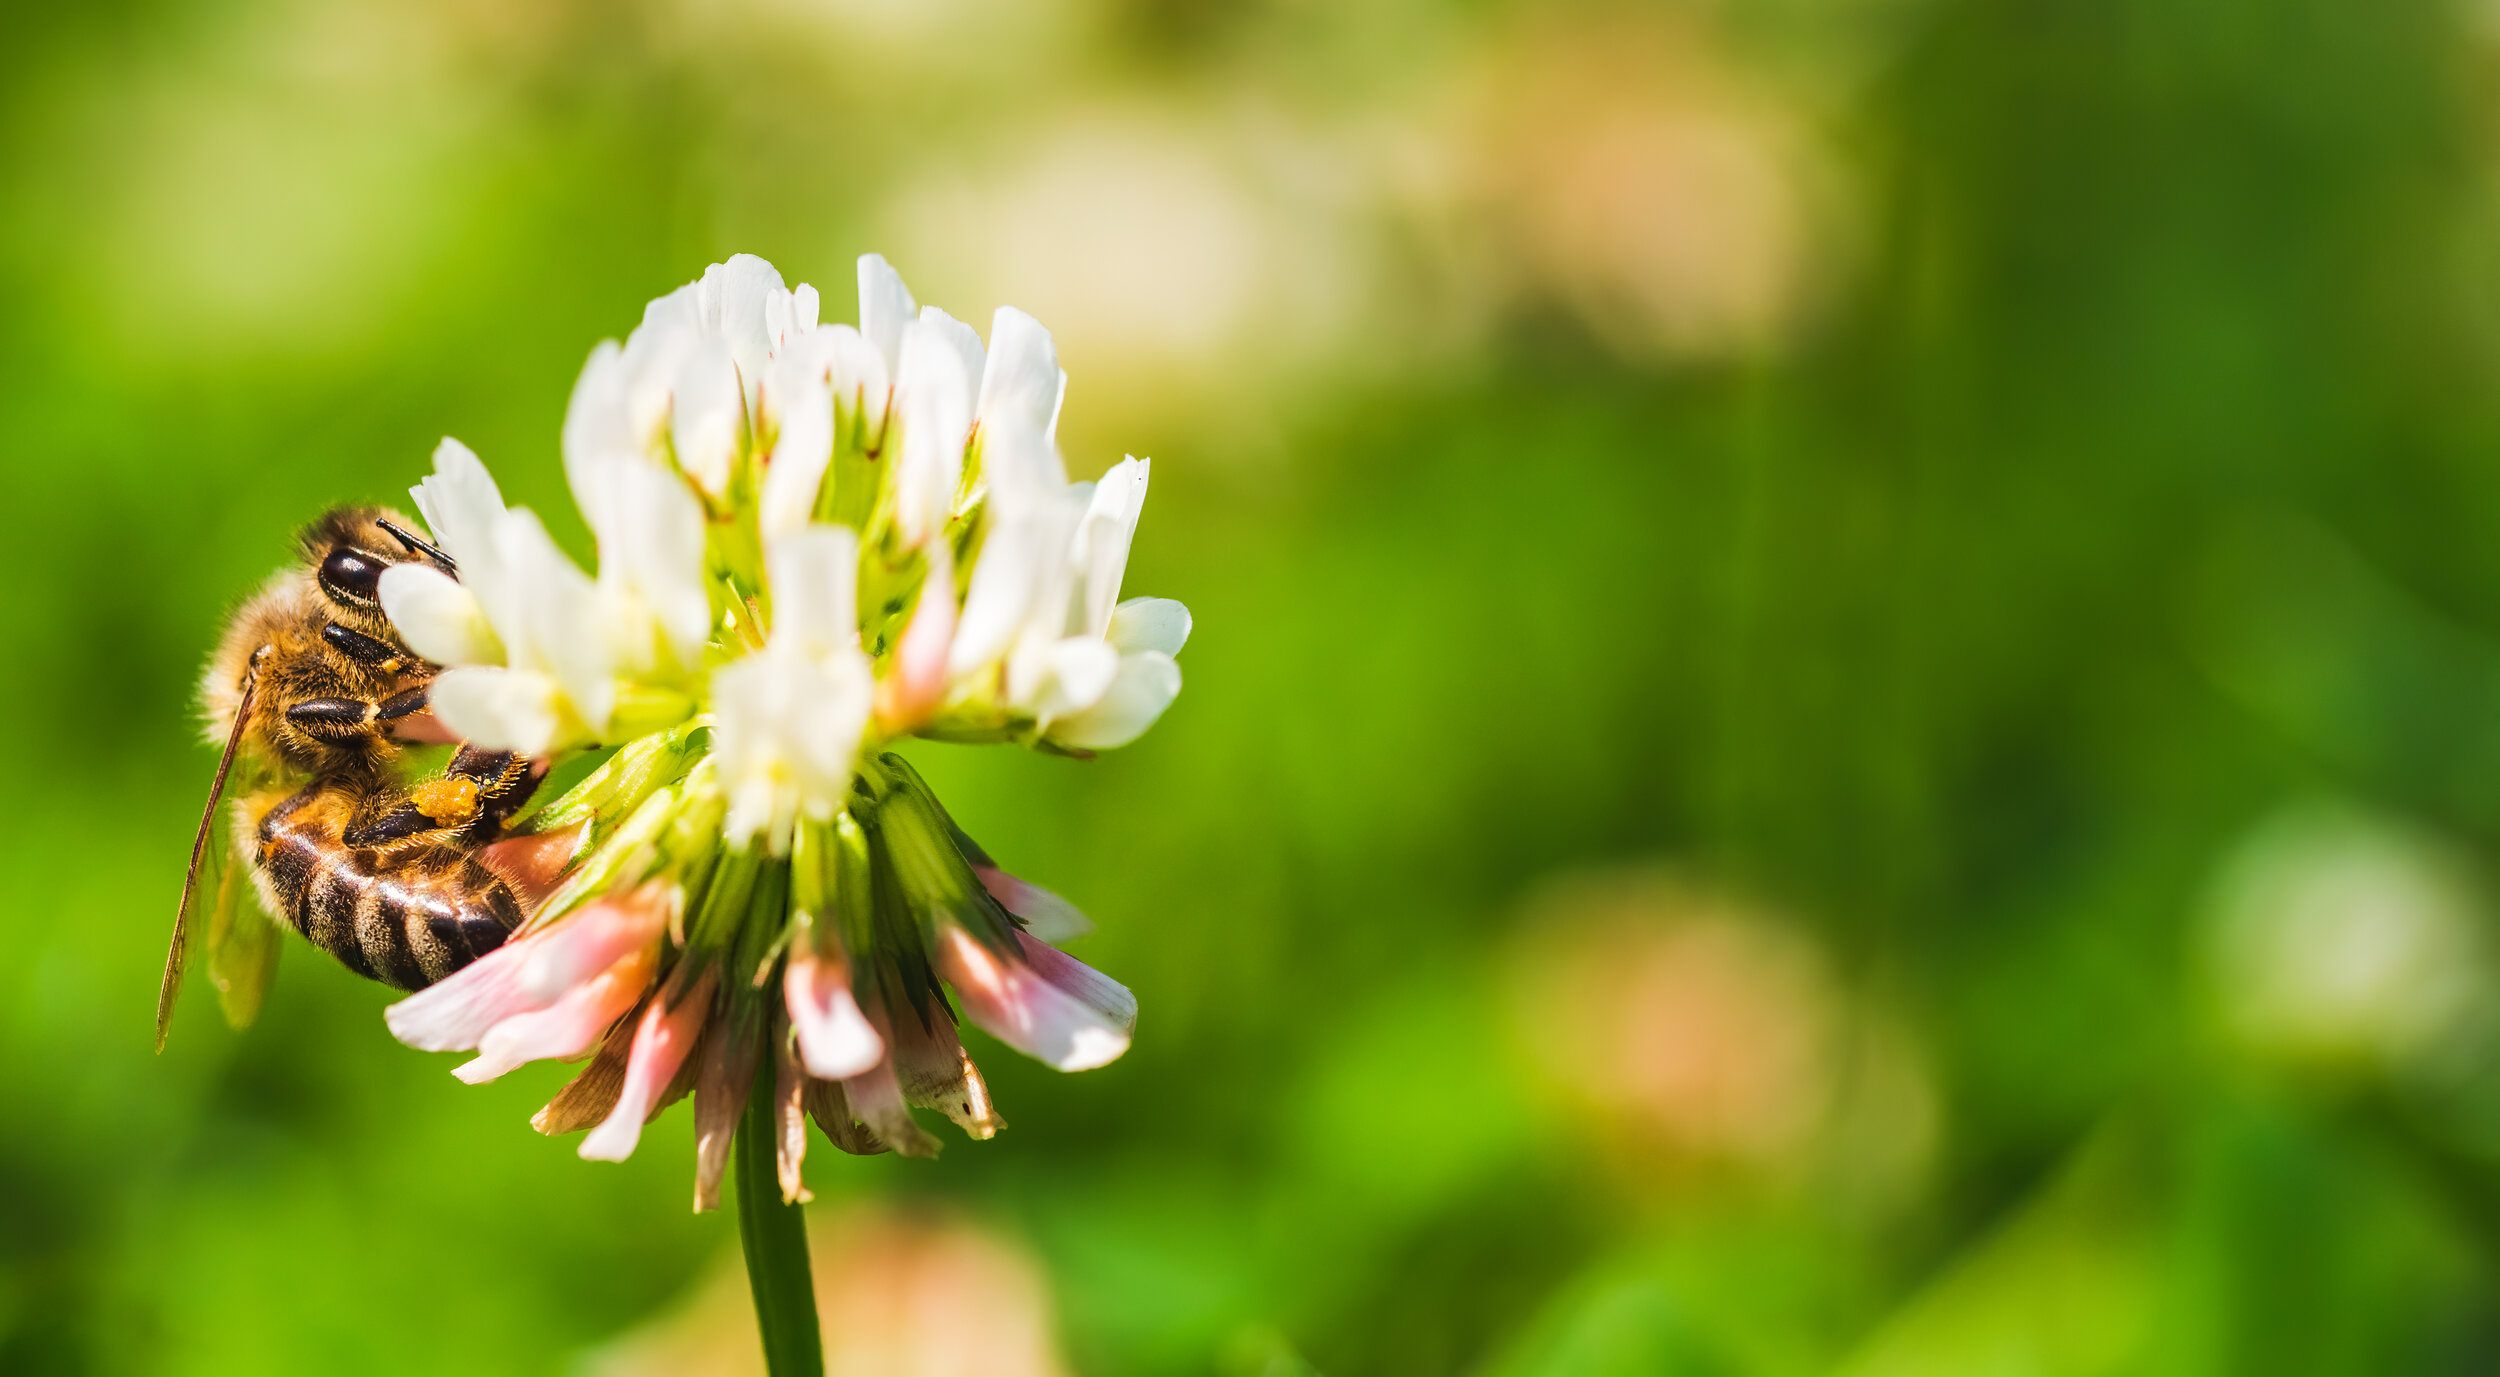 close-up-of-honey-bee-on-the-clover-flower-in-the--A4DGLX4.jpg